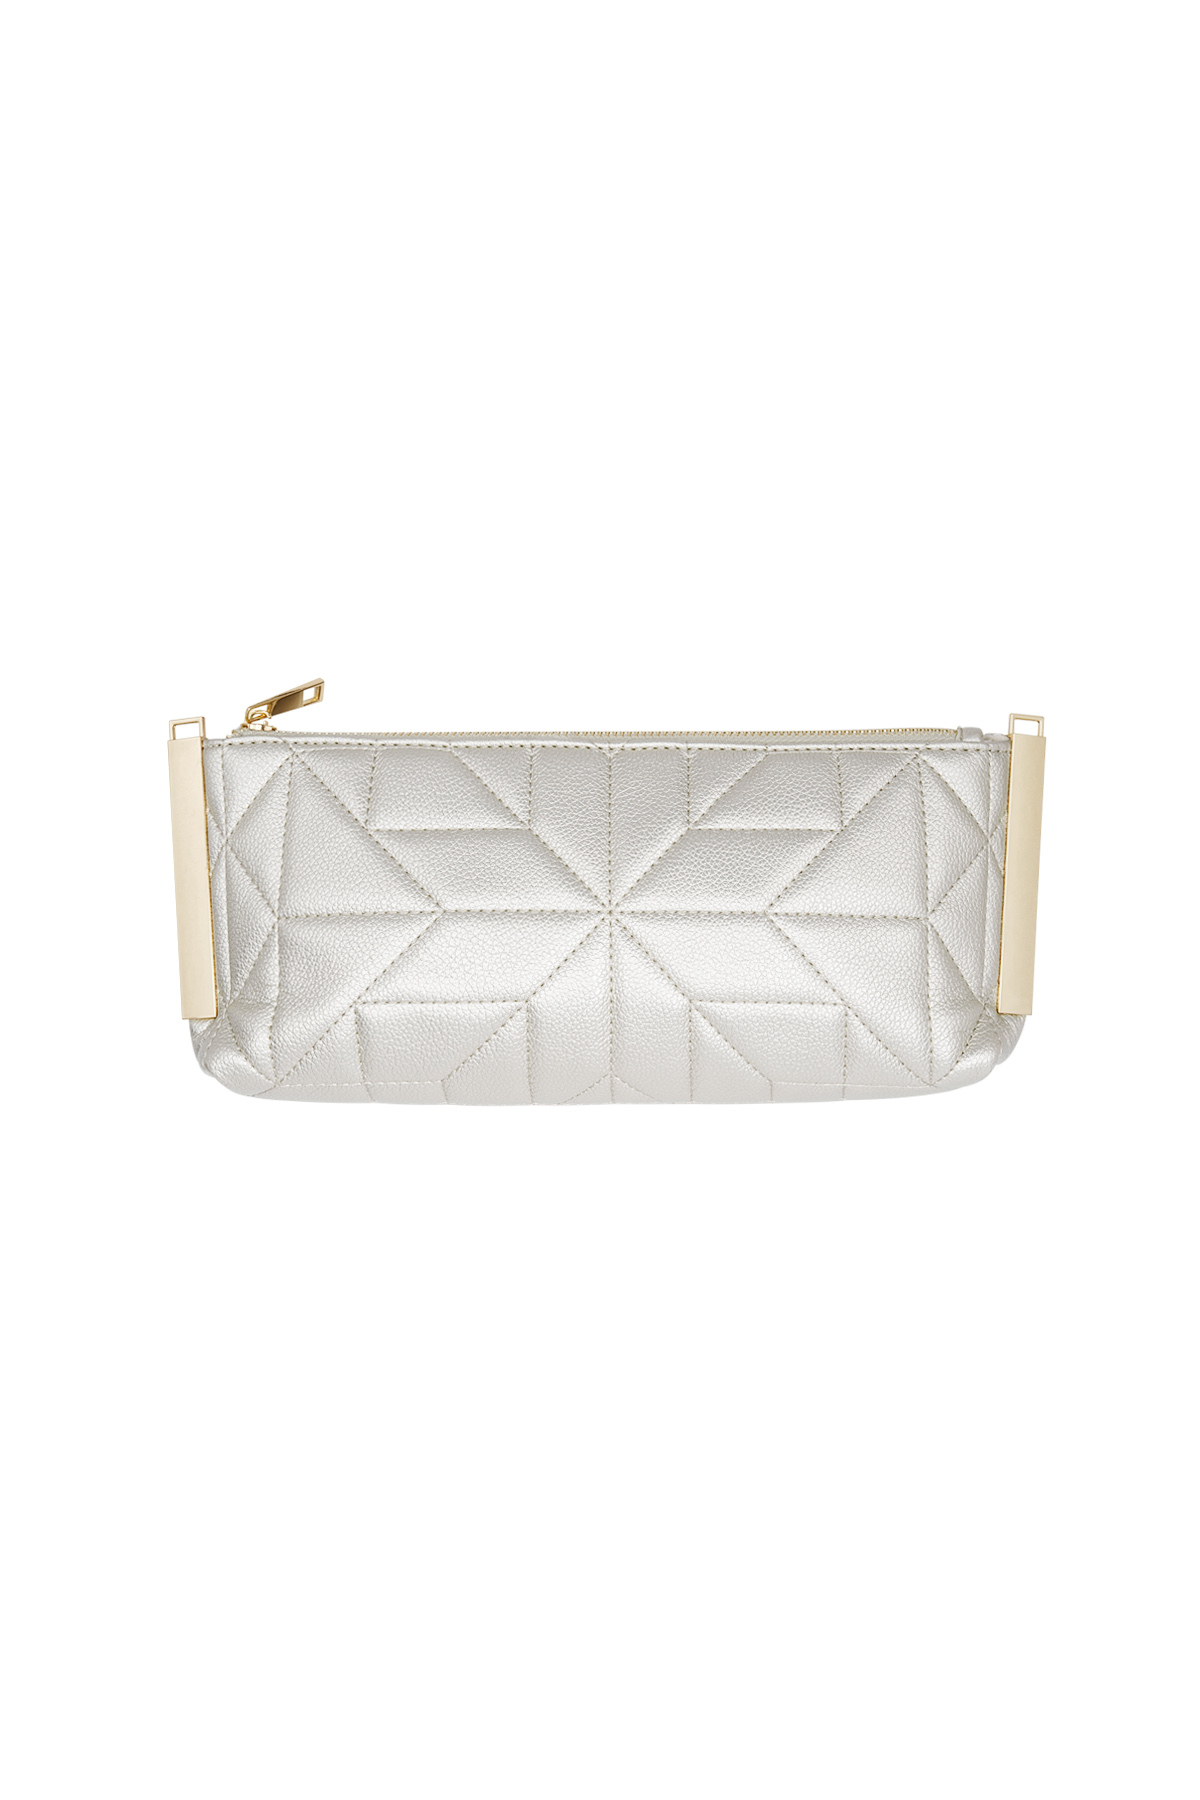 Stitched clutch with gold hardware - gold